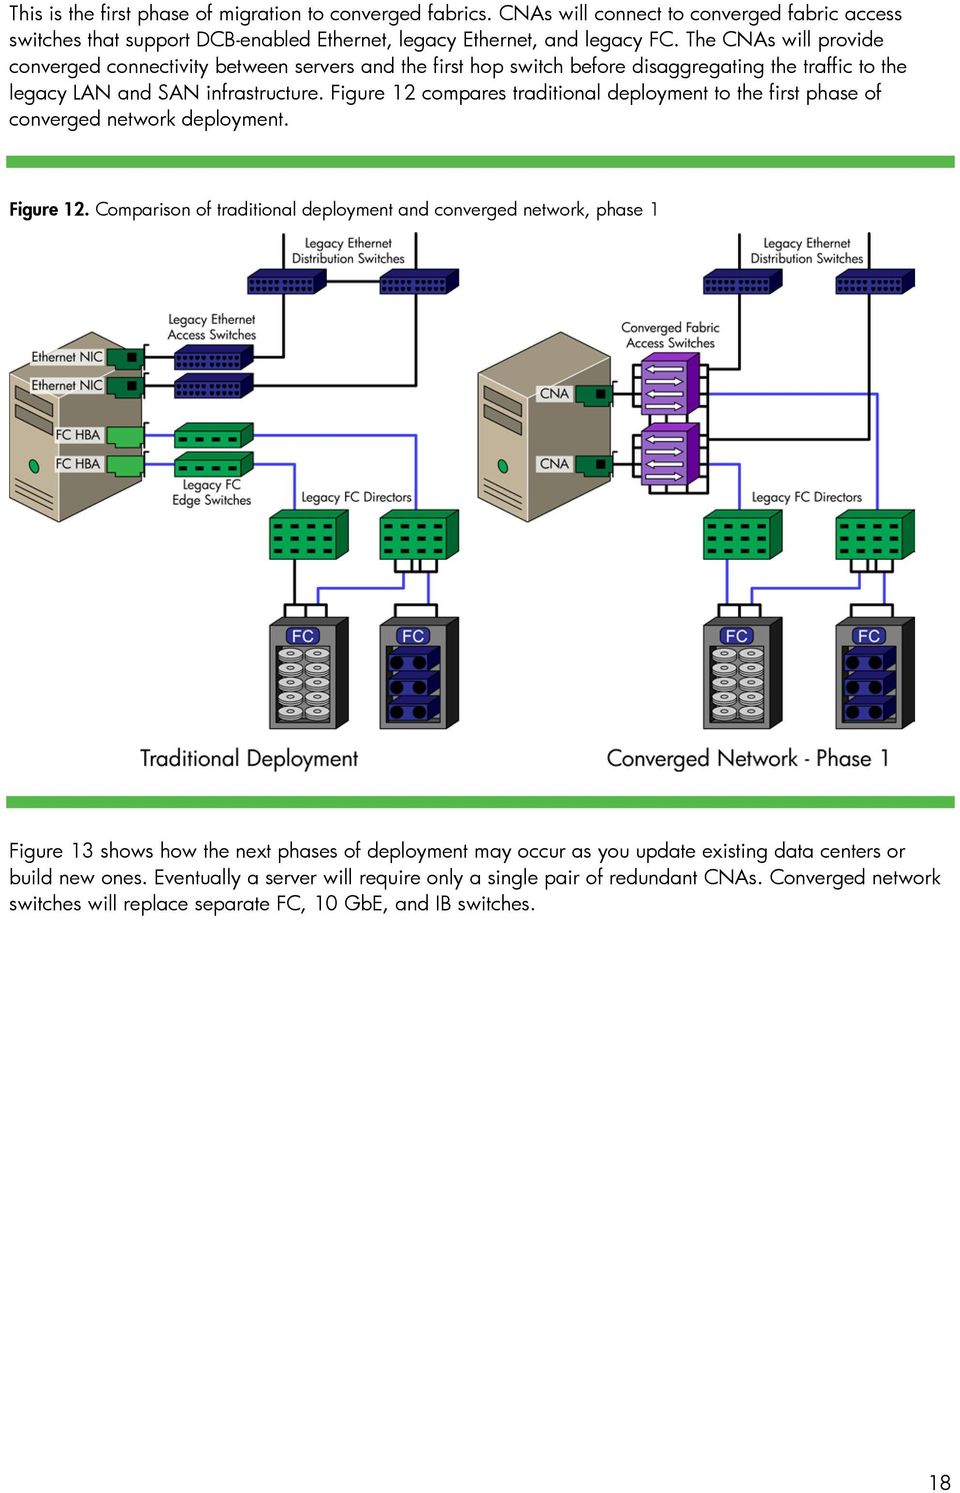 Figure 12 compares traditional deployment to the first phase of converged network deployment. Figure 12.